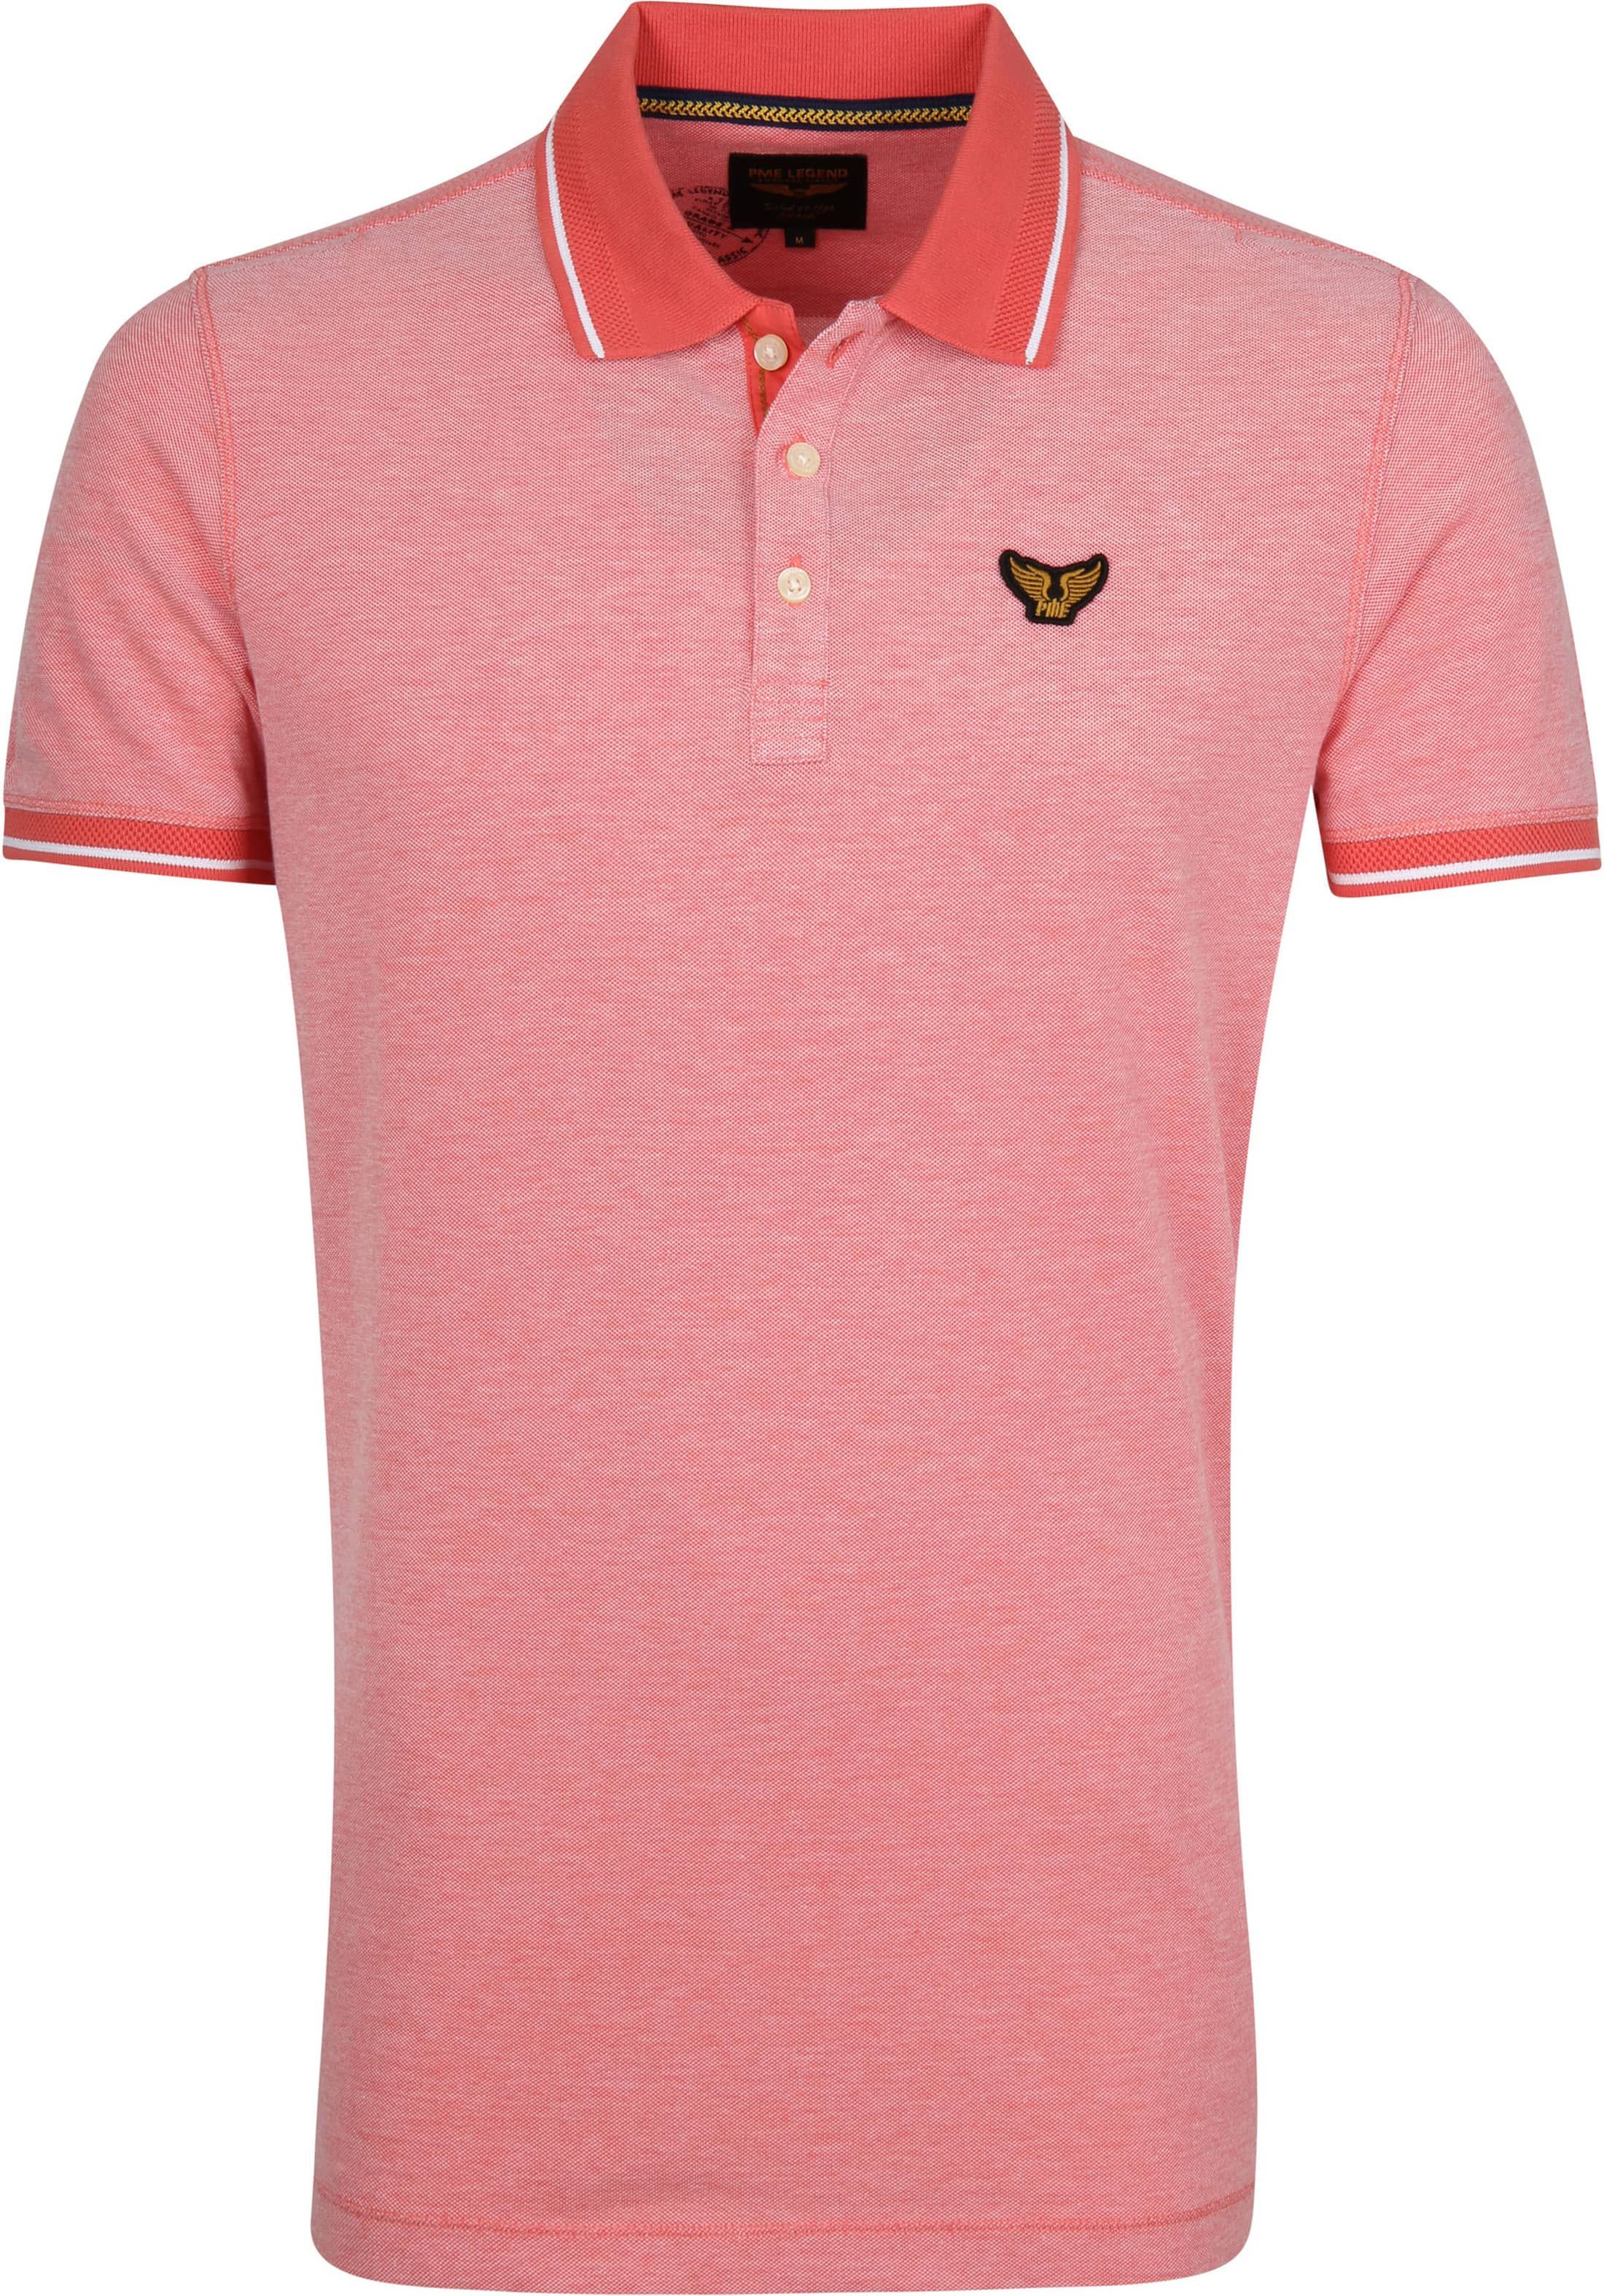 PME Legend Polo Shirt Red Pink size M